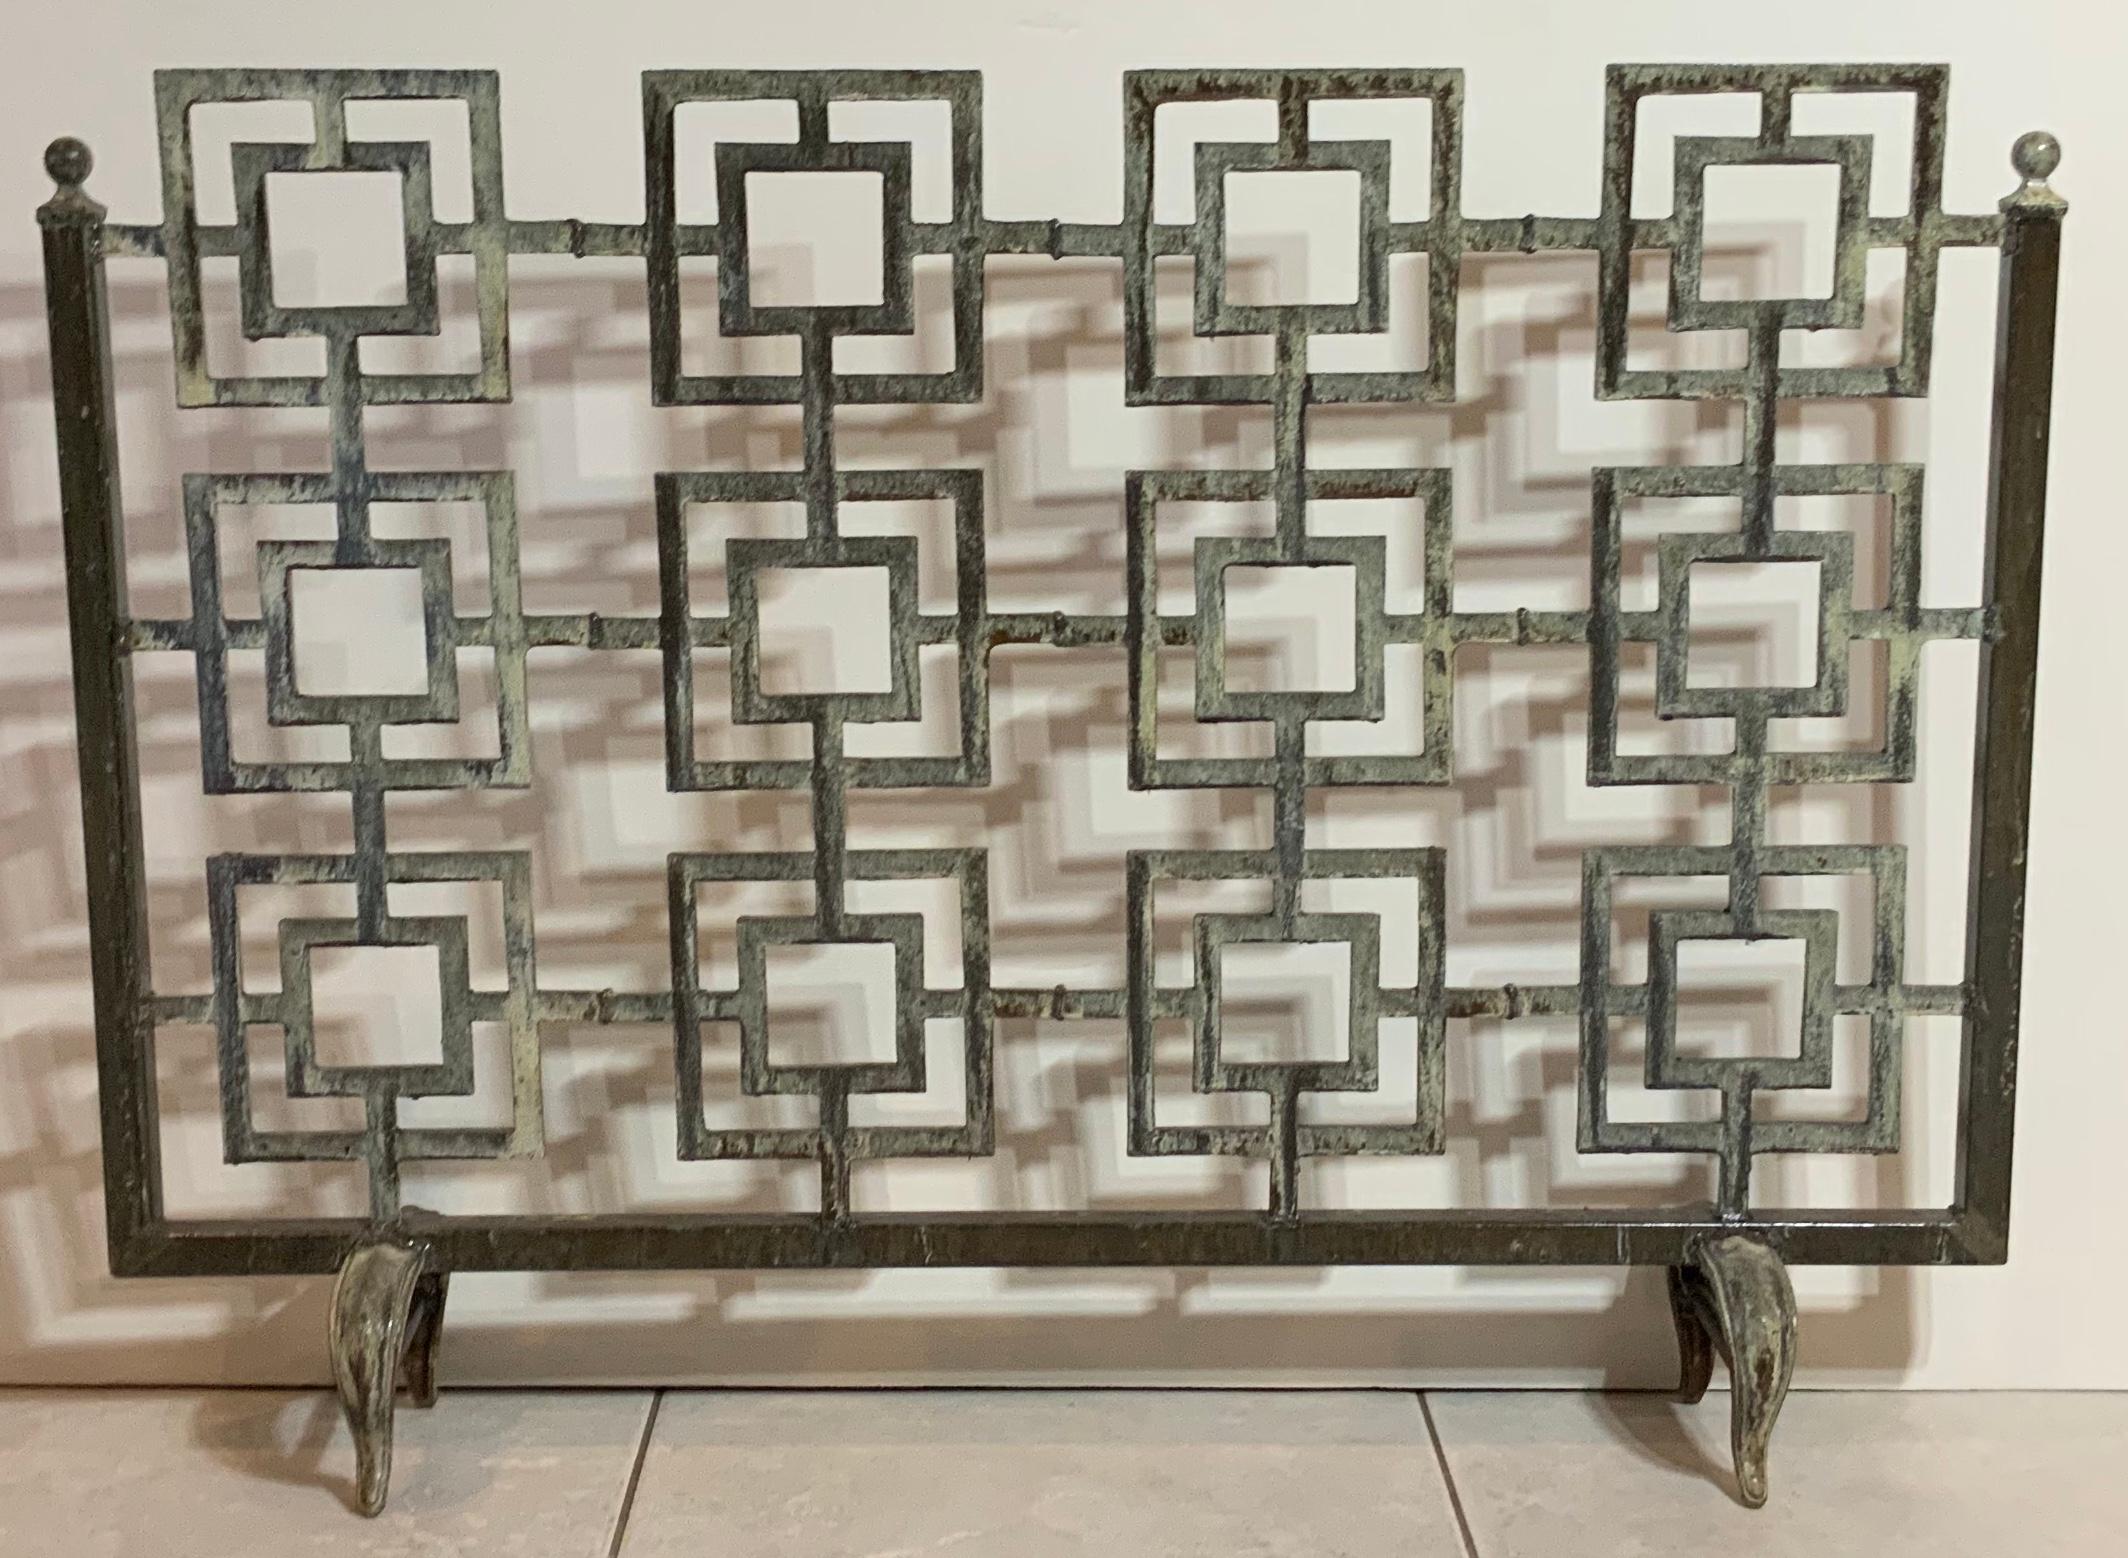 Elegant fireplace screen made of cast iron, artistic motif of squares put together with nice solid frame base. Treated and seal for rust
Beautiful patina. Fine object of art for the fireplace.